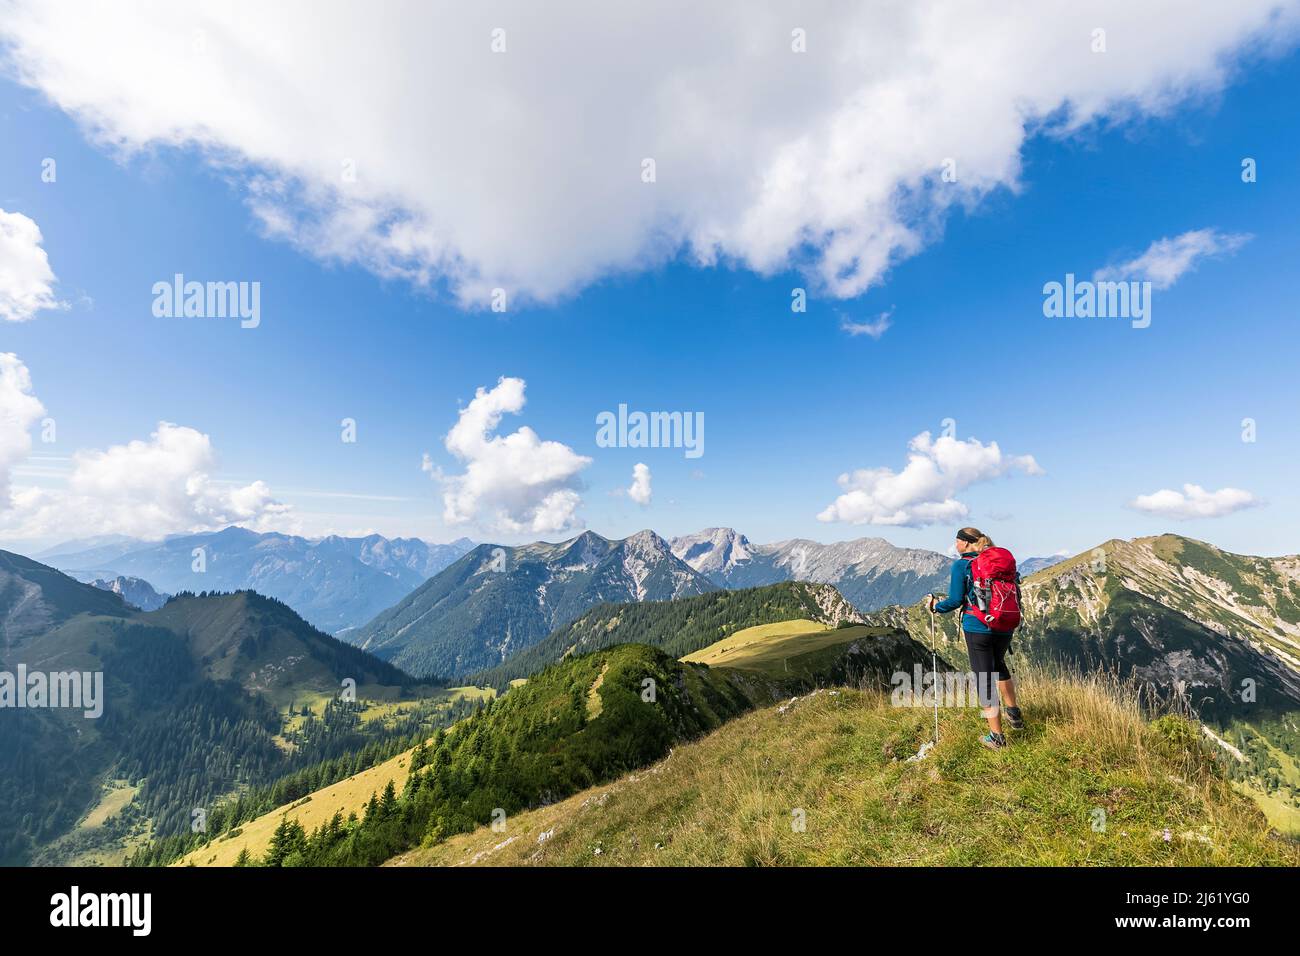 Woman with hiking pole standing on mountain Stock Photo